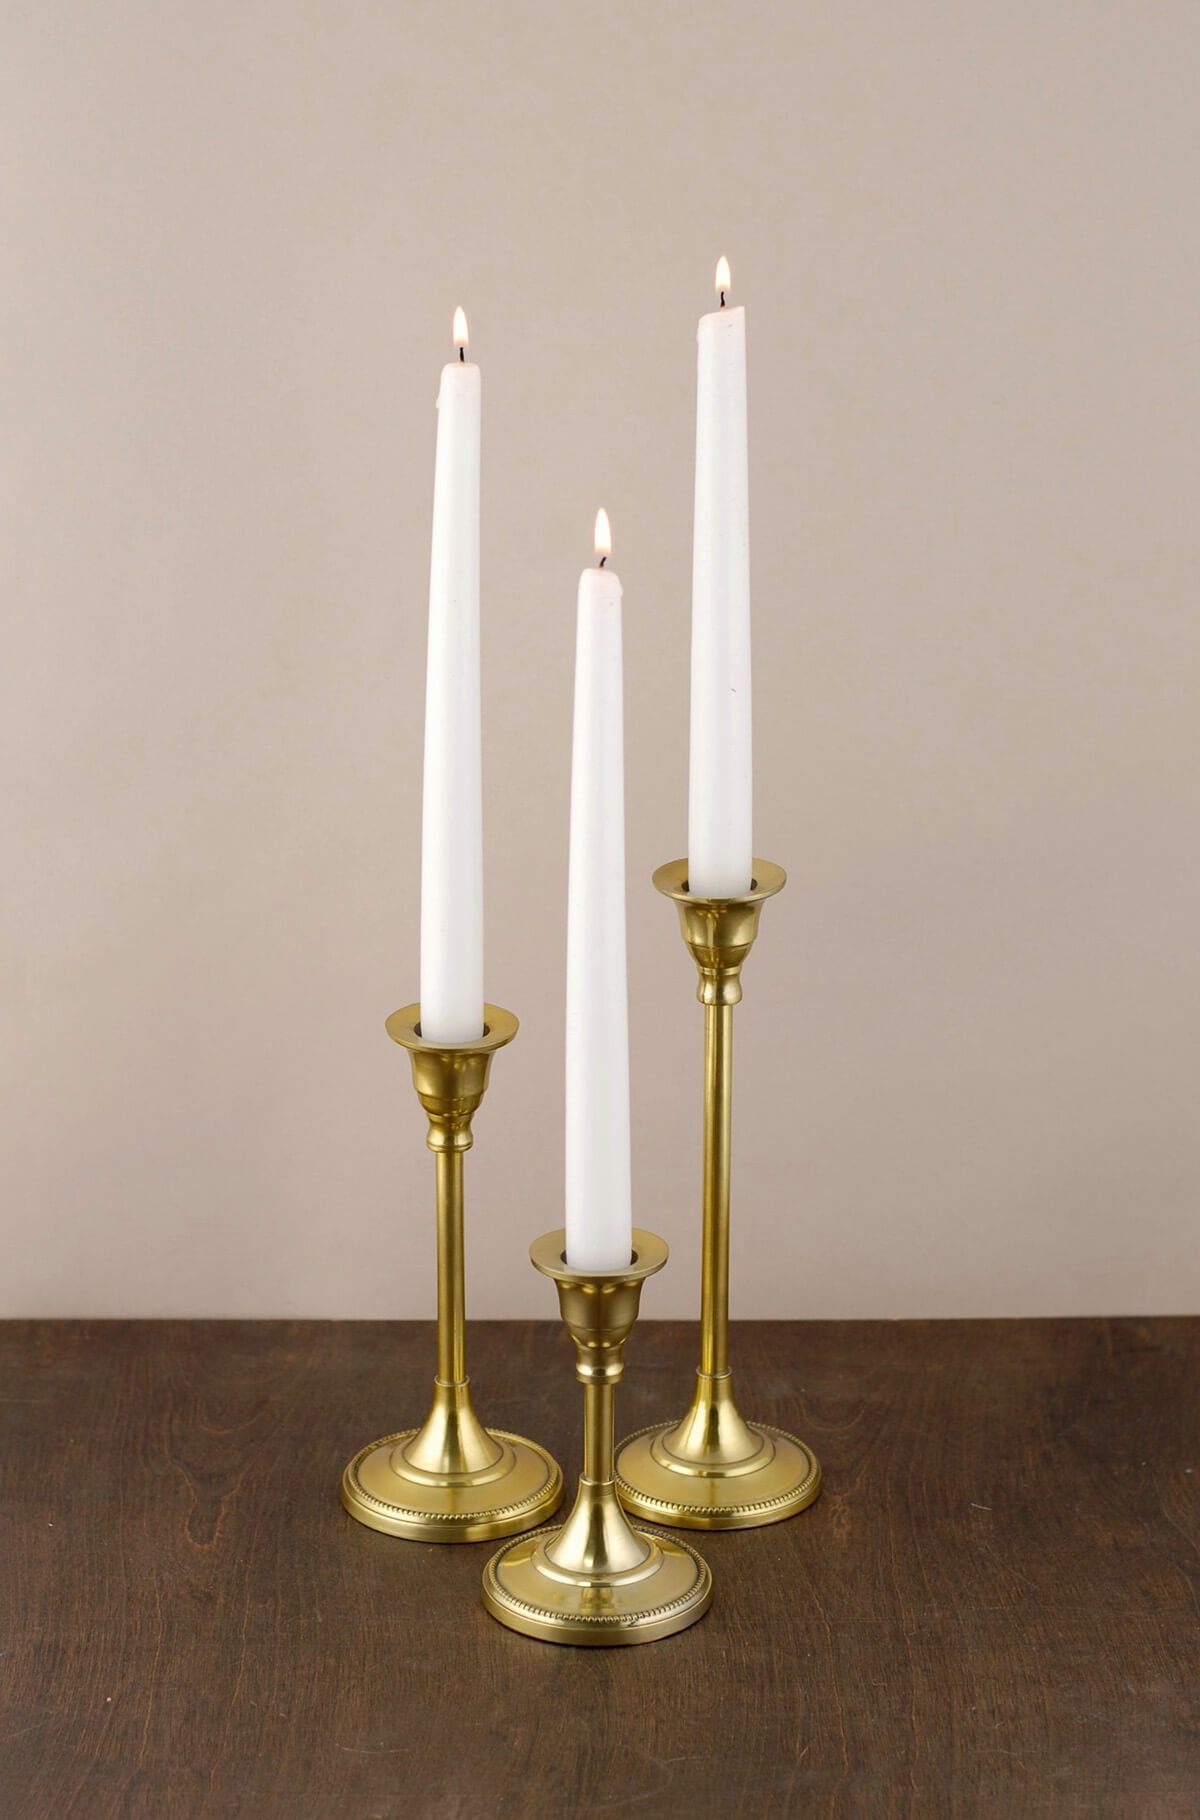 Gold Candle Holders for Pillar Candles - Inweder Matte Tall Candle Holder  Set of 3, Large Metal Candle Stand, Modern Pillar Candle Holder for Table